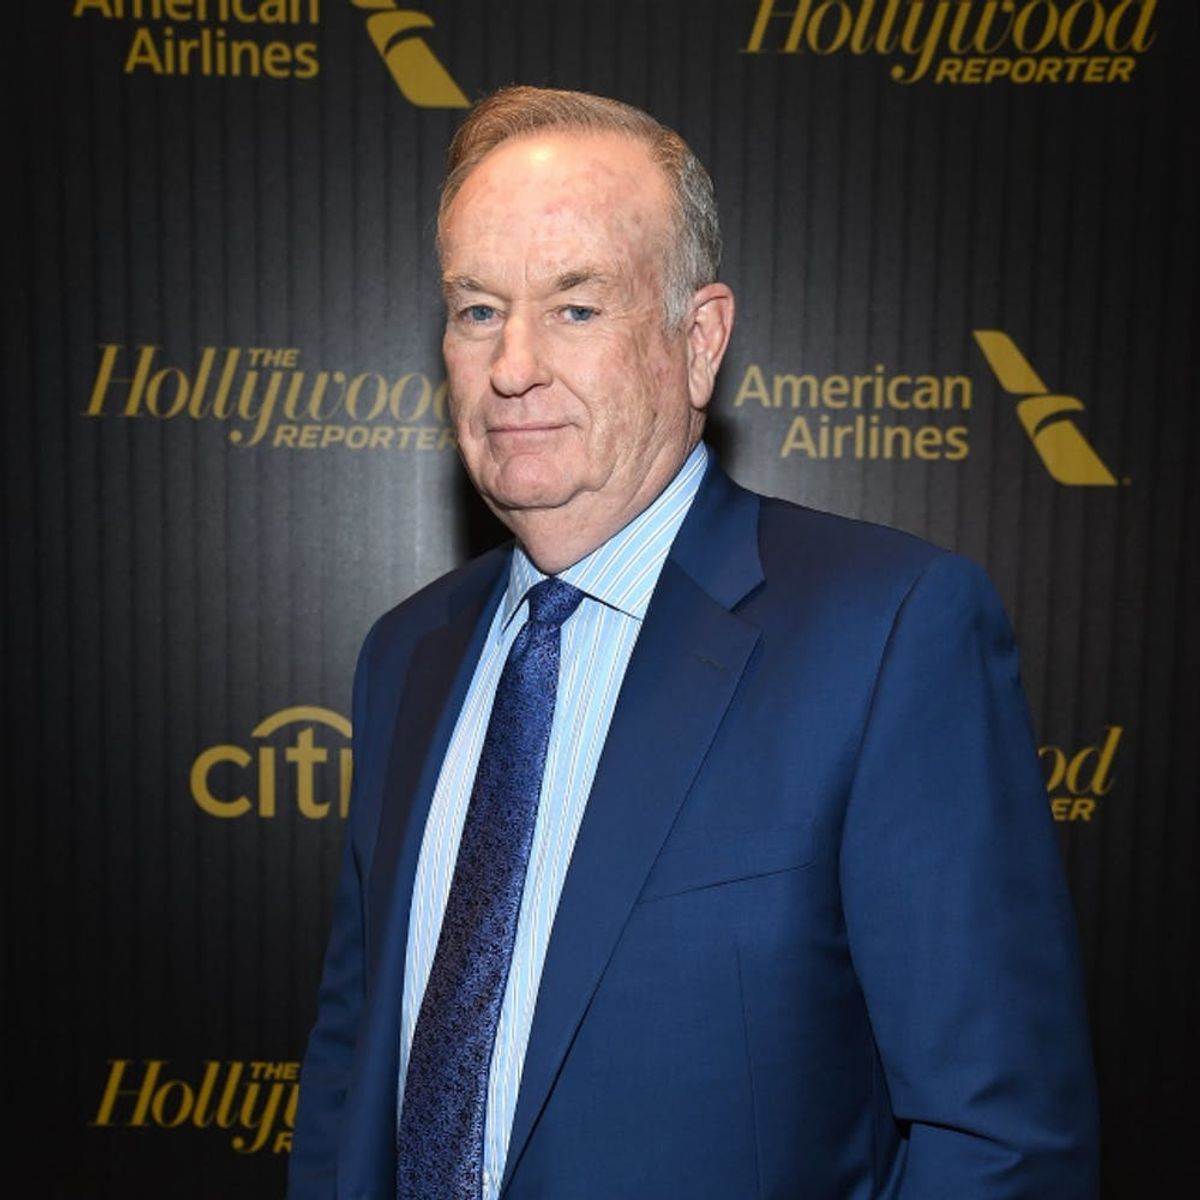 Fox News Settled Sexual Harassment Allegations Against Bill O’Reilly in Secret